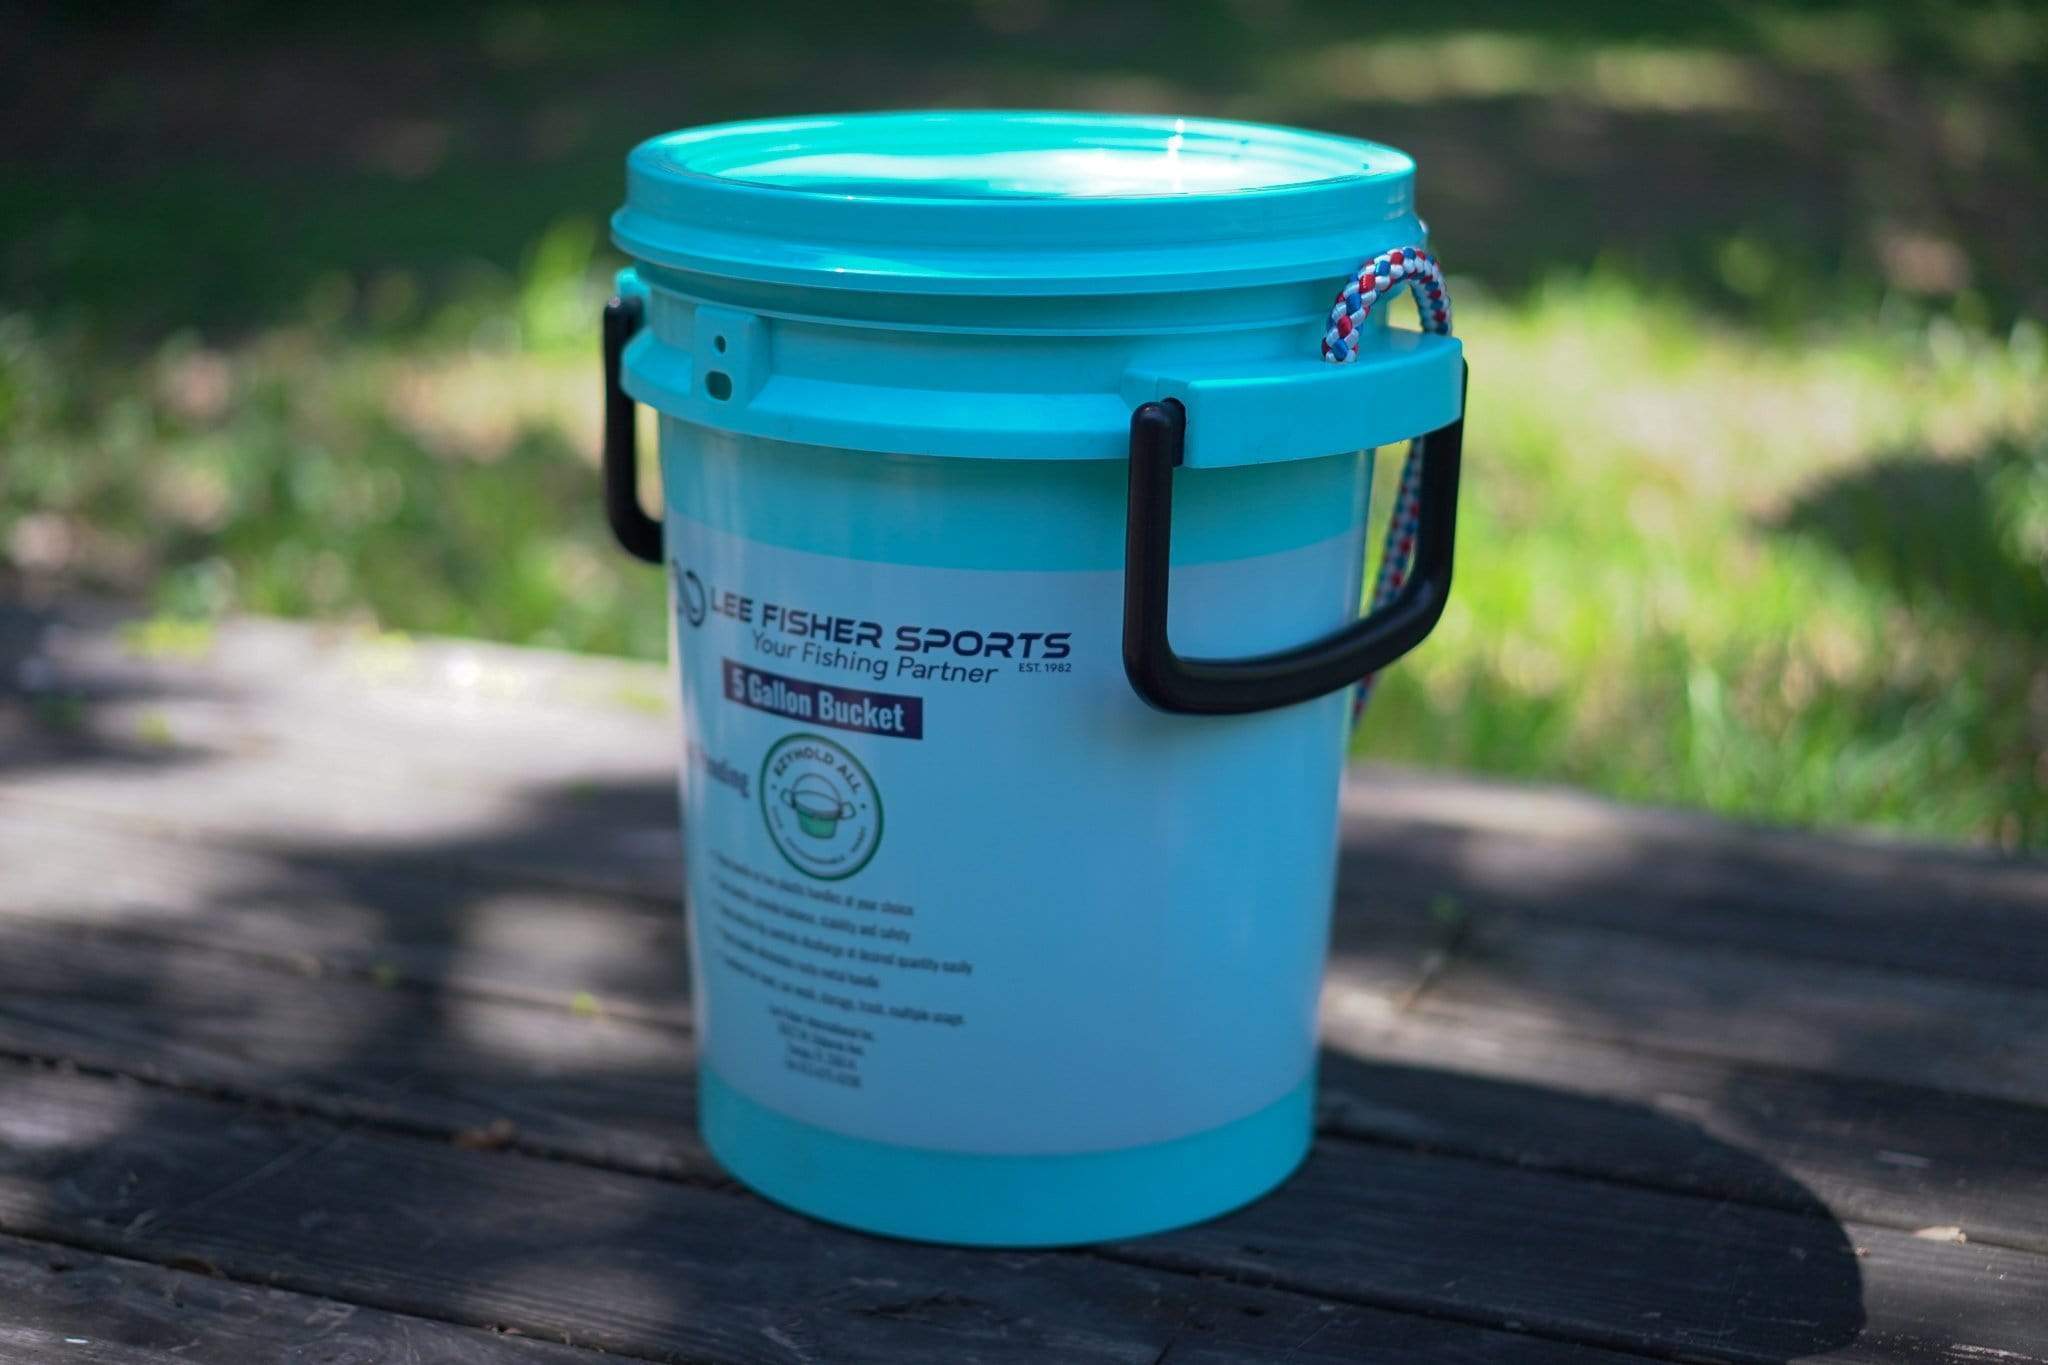 BUCKET PAL- 5 GALLON BUCKET WITH LID, PRINTED BLUE